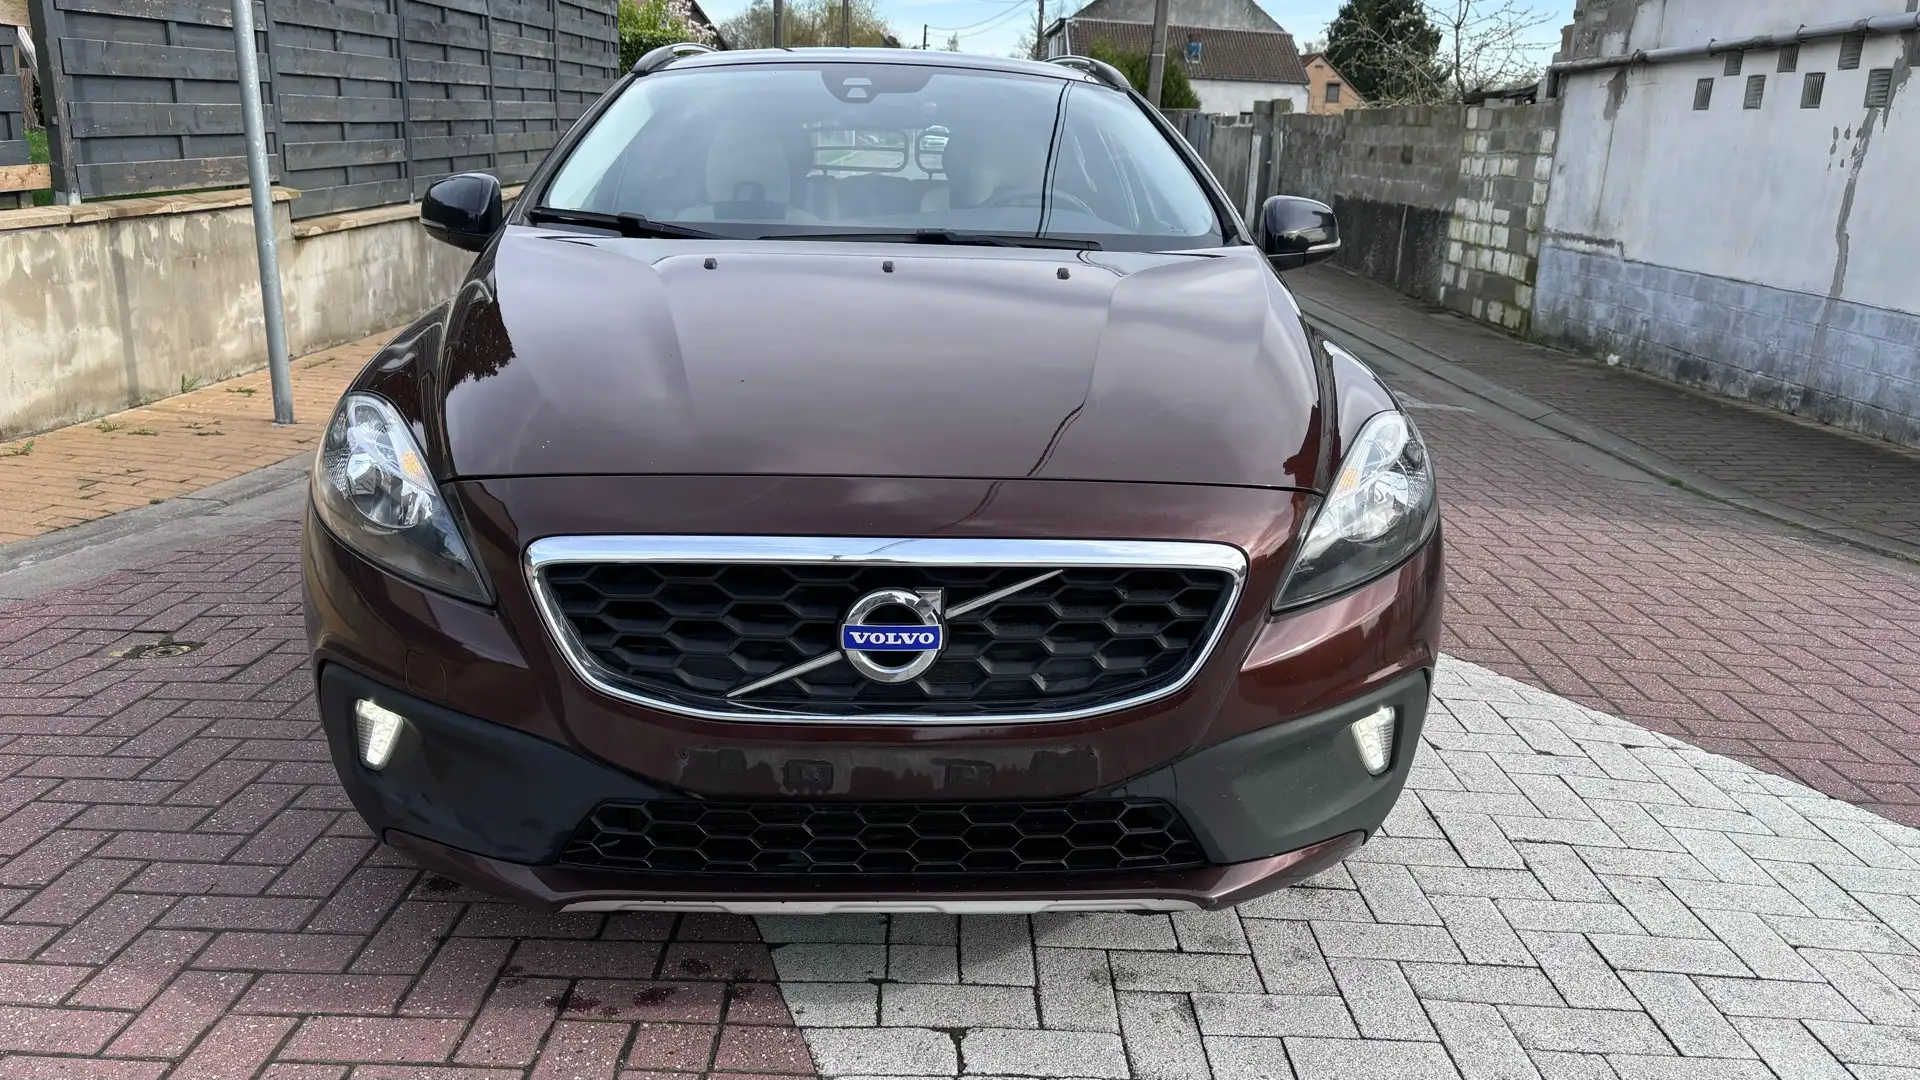 Volvo V40 Cross Country 2.0 D2/96gr/CUIR/GPS/PANO/LED EXPORT OU MARCHANDS Maro - 2